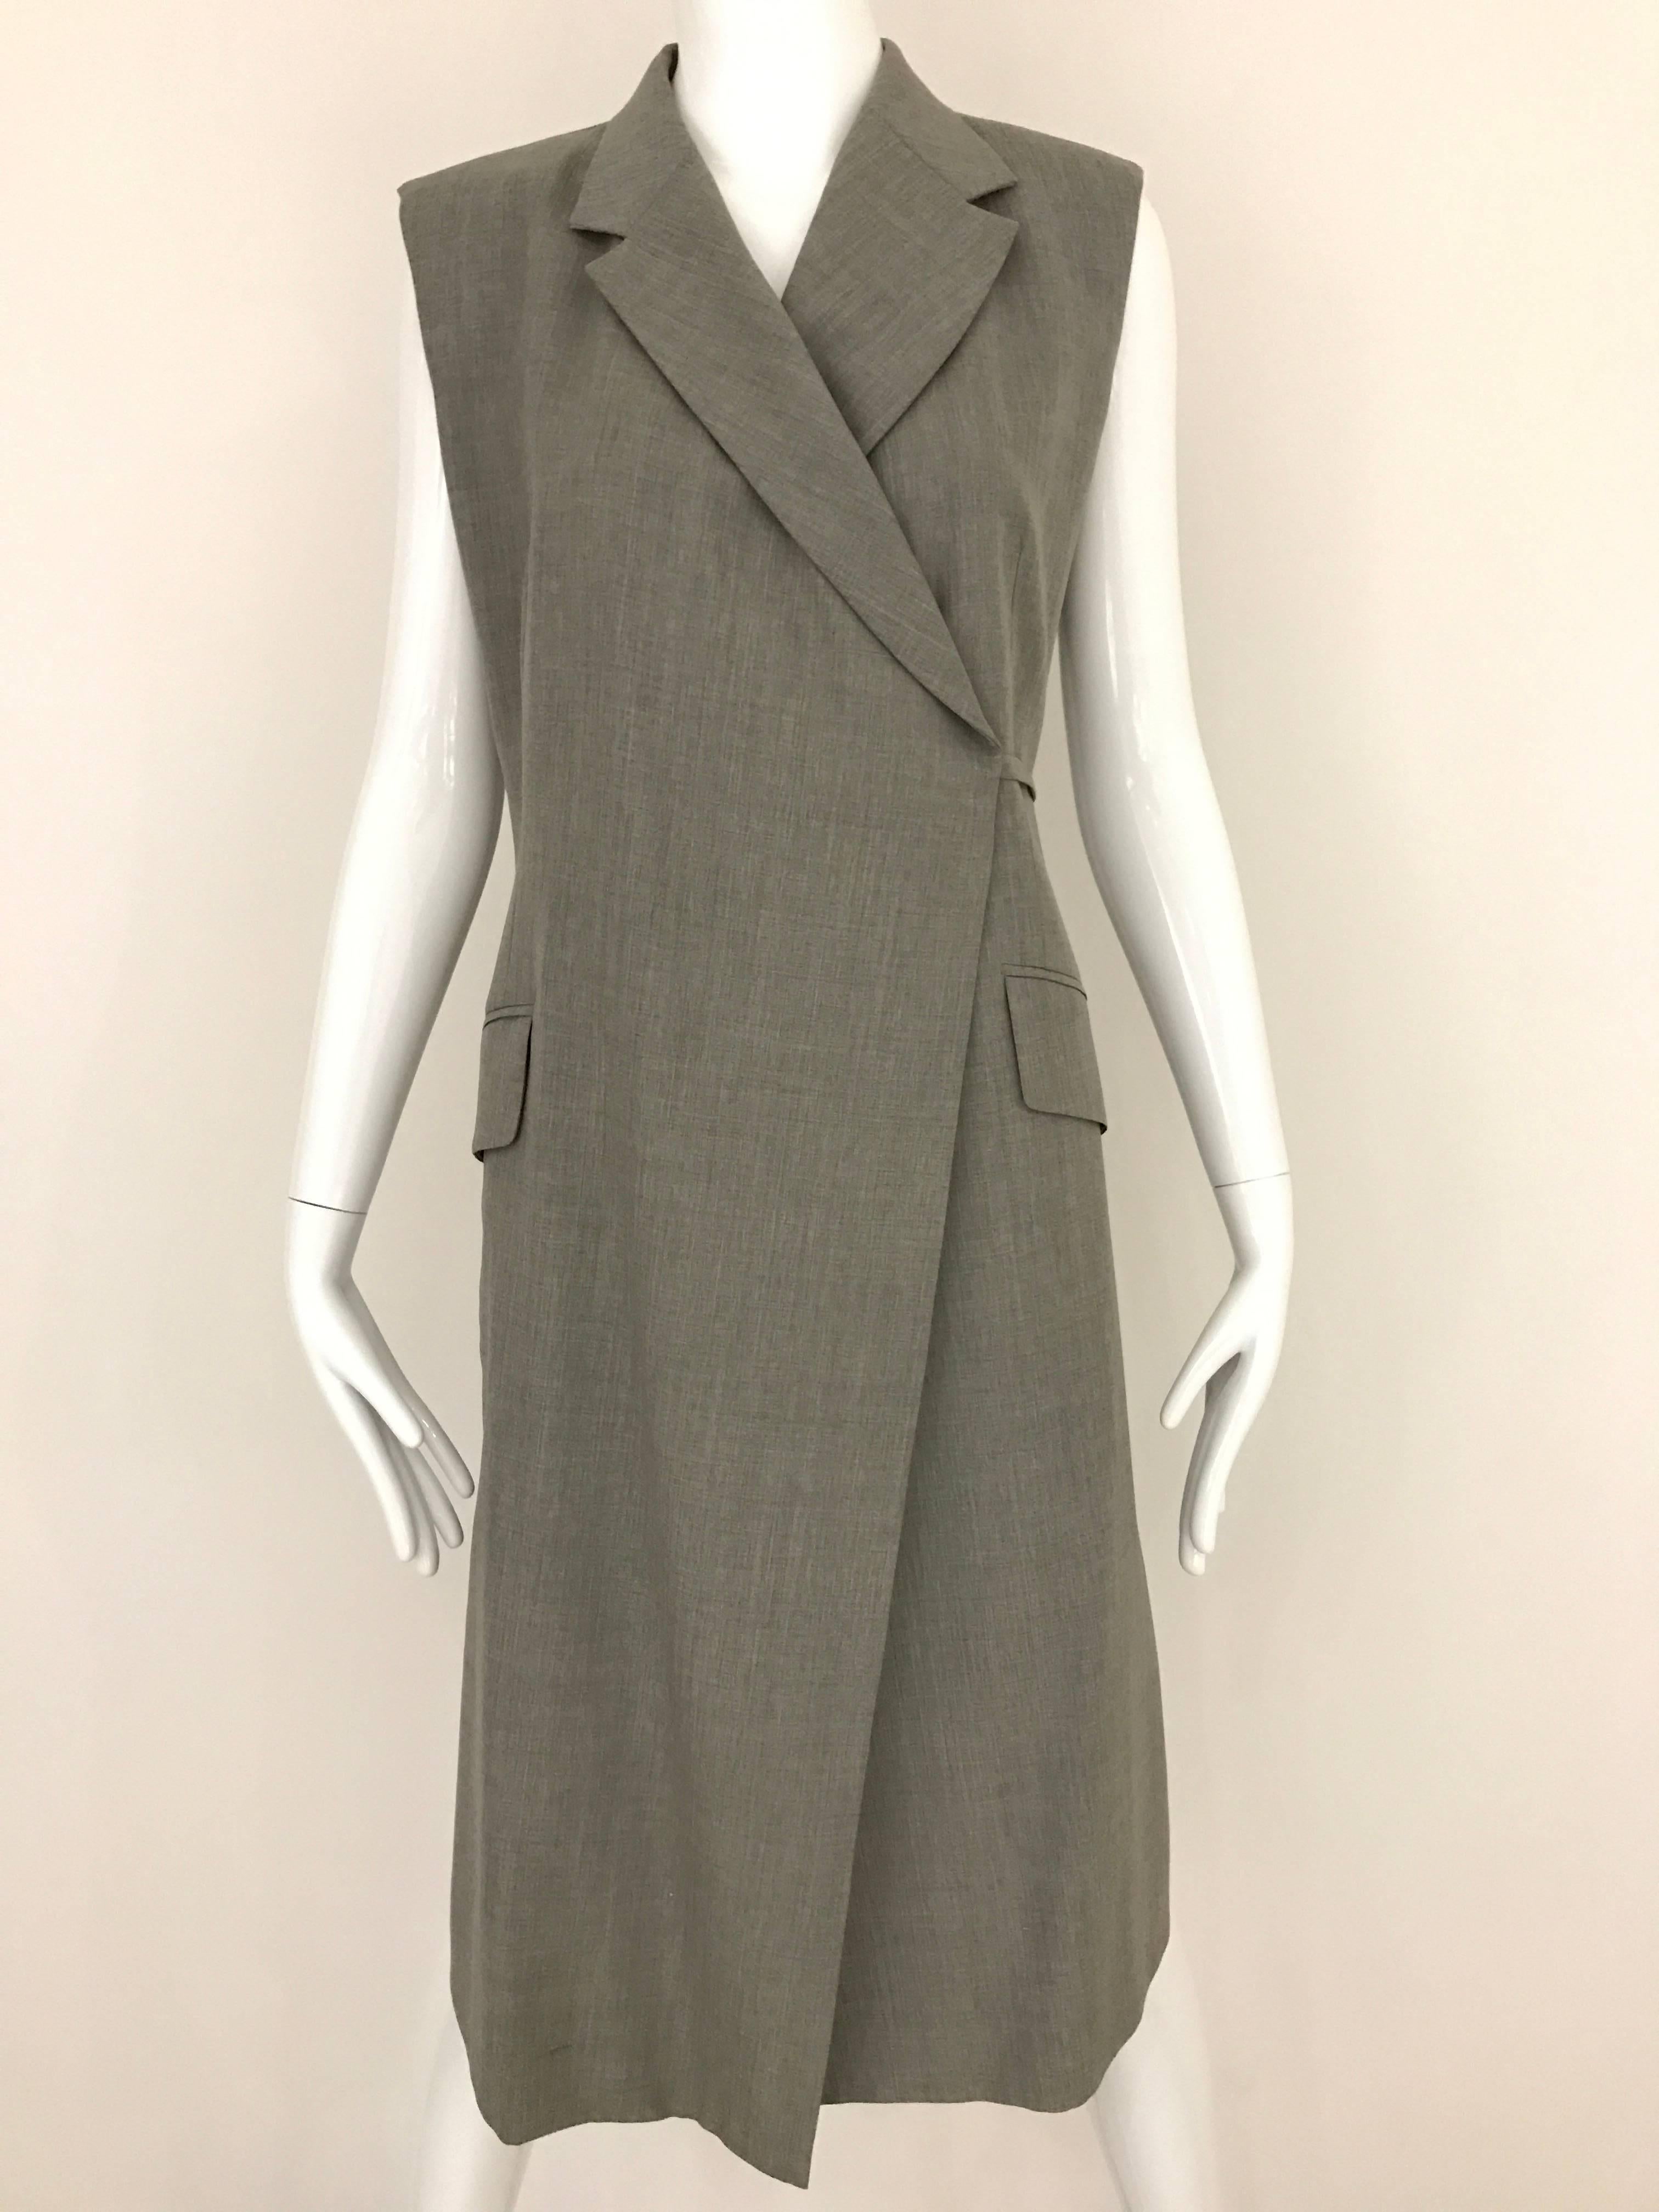 1990s  ISAAC MIZRAHI Gray Light Waistcoat Vintage Wrap Dress. Fabric made of light wool. Large Pockets on side and soft shoulder pad. Dress is lined in Silk. 
Simply Chic and modern. 
Size: MEDIUM 6
Bust: 36 - 40 inch  / Waist 30 - 34 inch  / Hip: